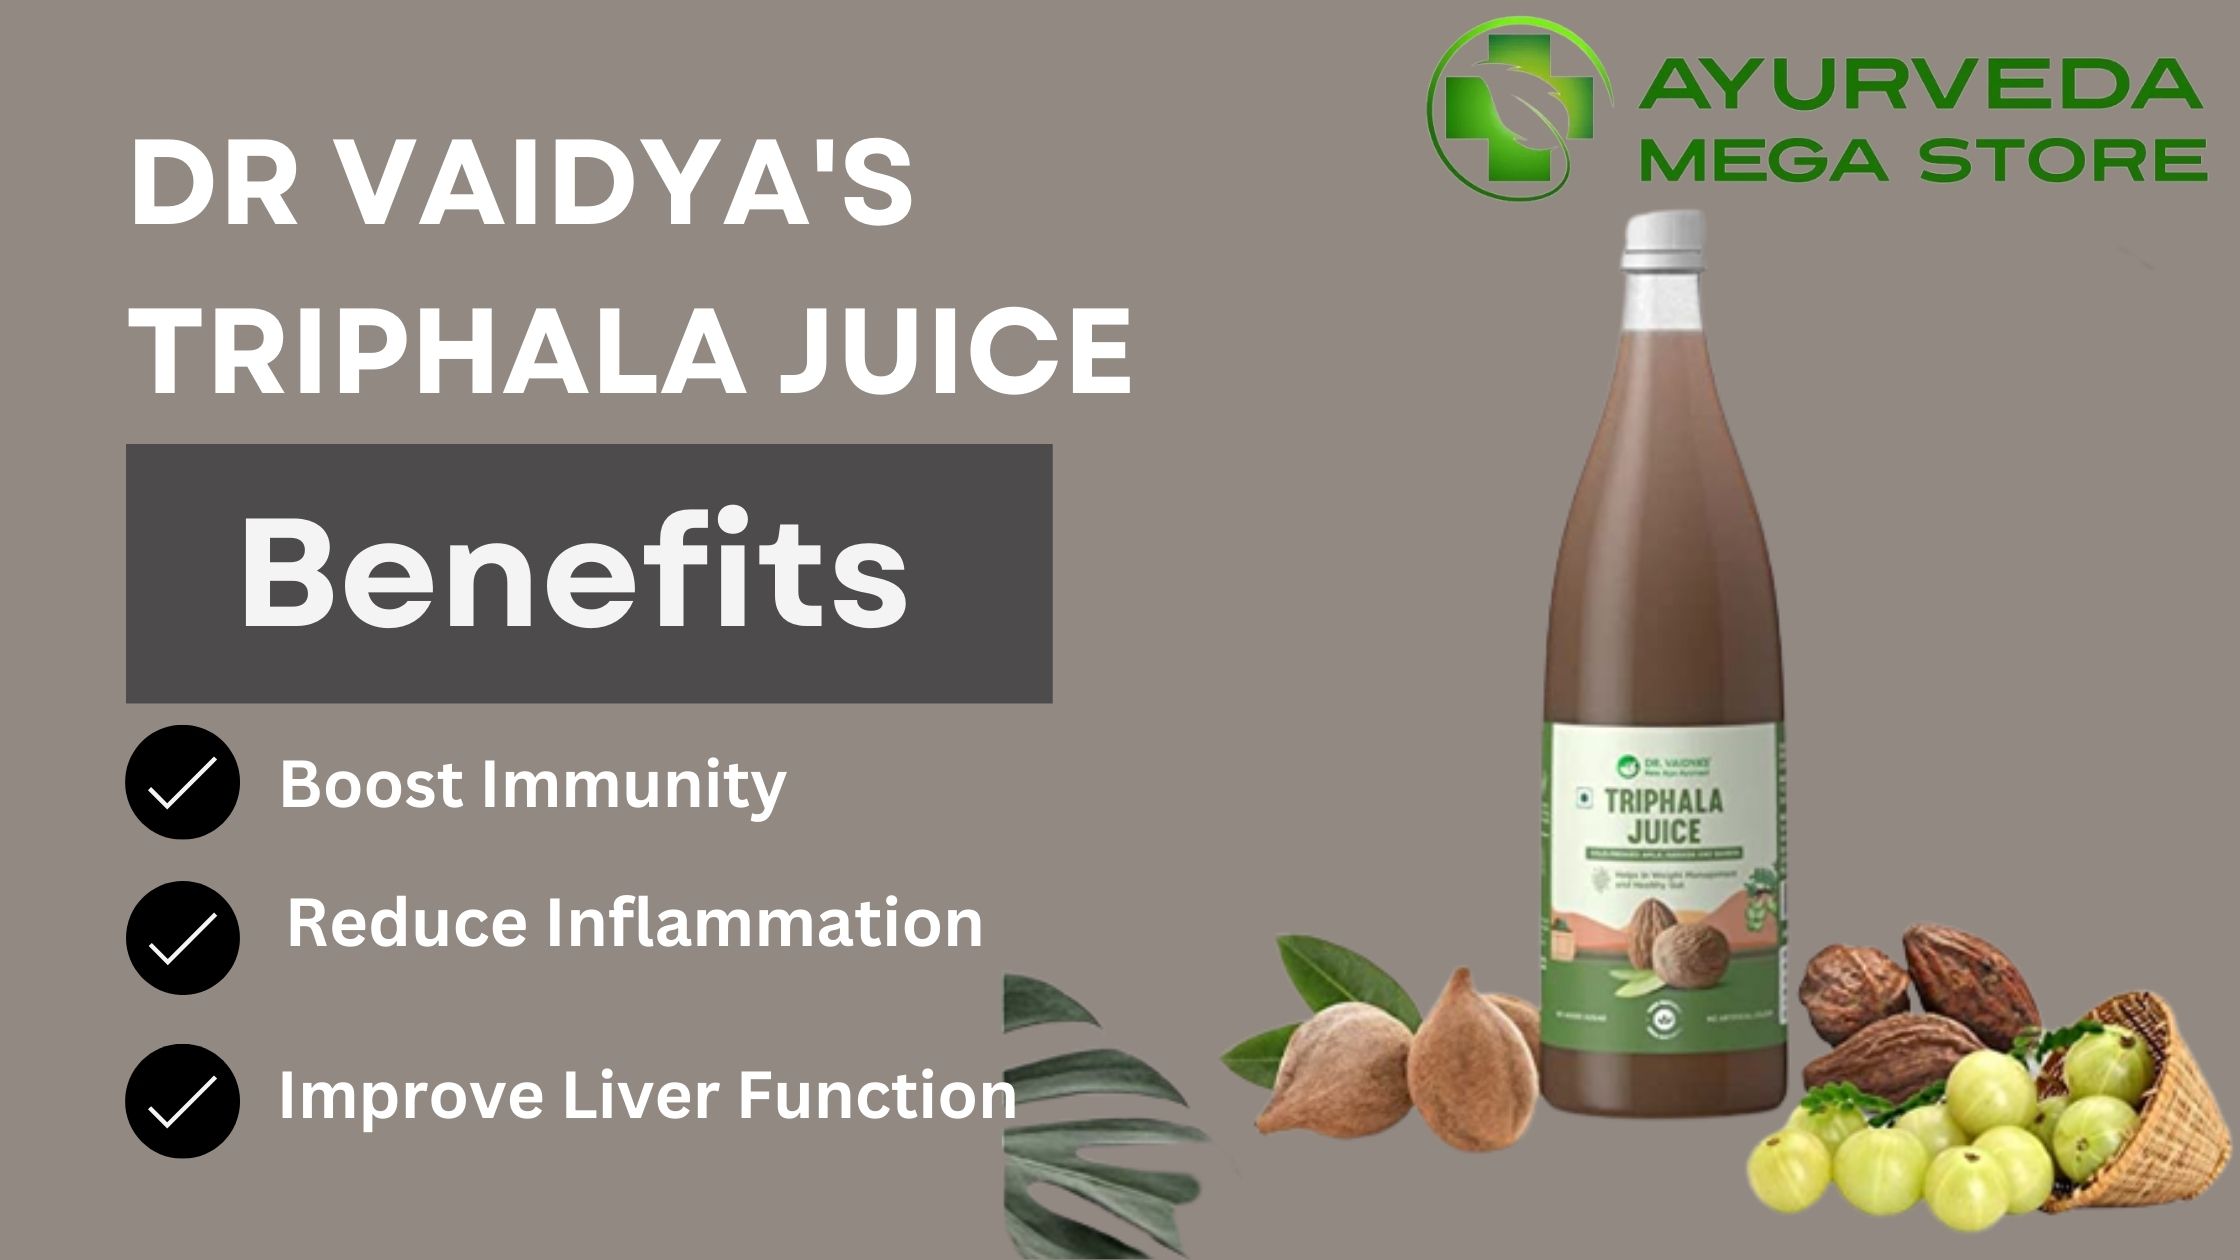 Integrating Ayurvedic Wellness into Your Daily Routine with Dr Vaidya's Triphala Juice